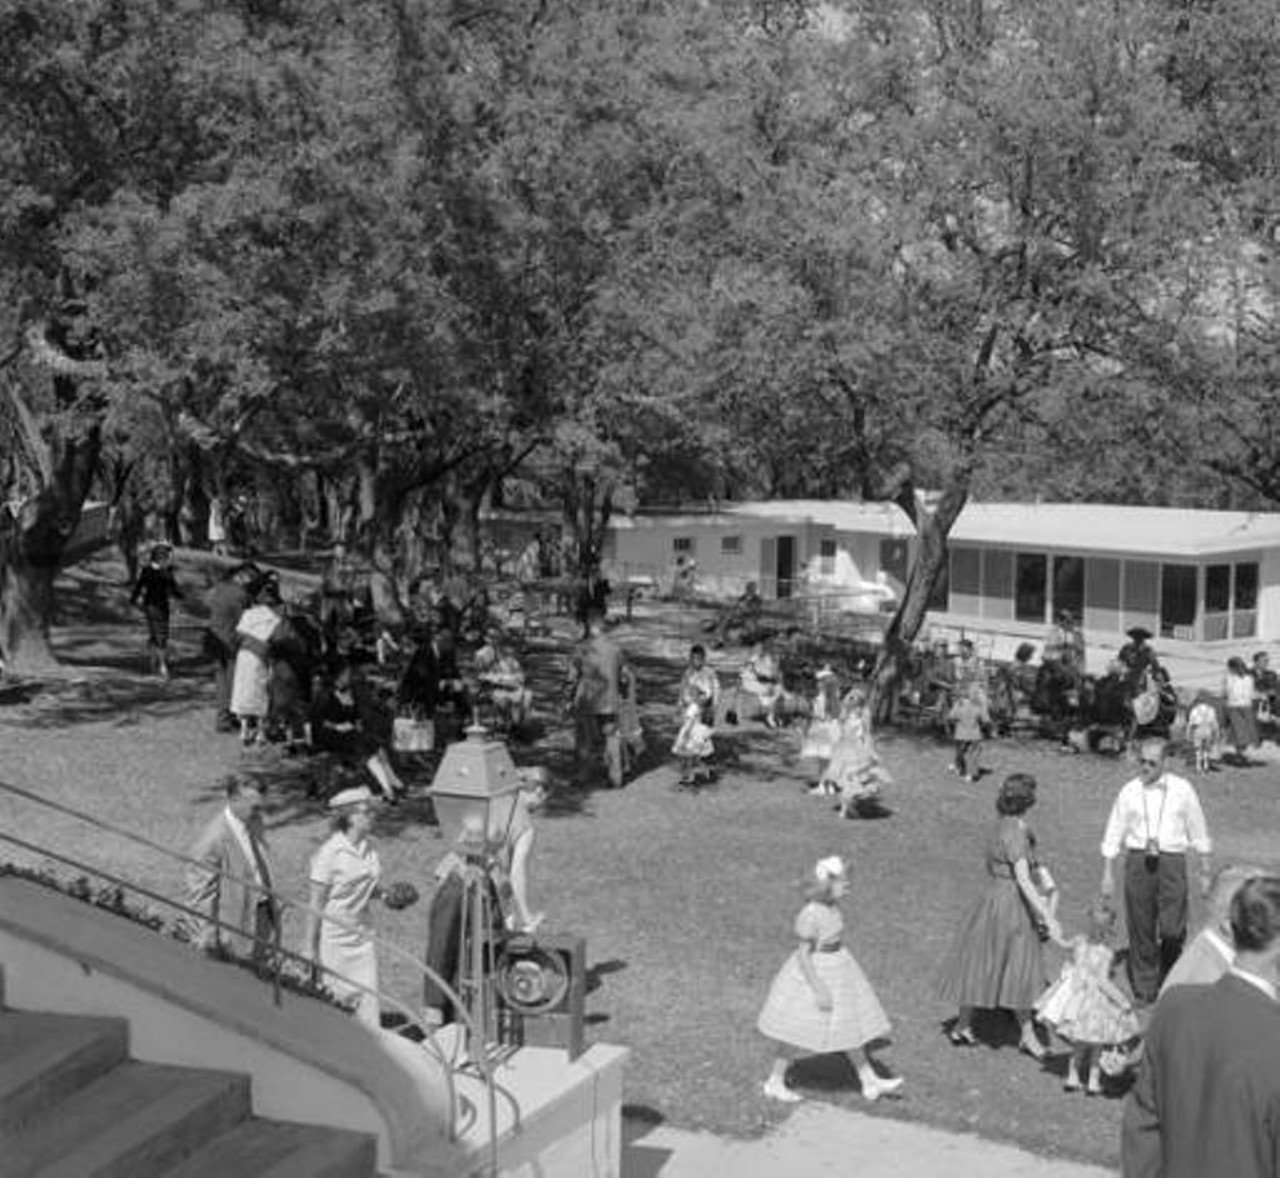 Easter Egg Hunt at Oak Hills Country Club, 1958
Another small event held at Oak Hills Country Club, the Easter egg hunt is a classic Easter activity, which the Oak Hills Country Club still hosts.
Photo via Zintgraff Studio Photo Collection